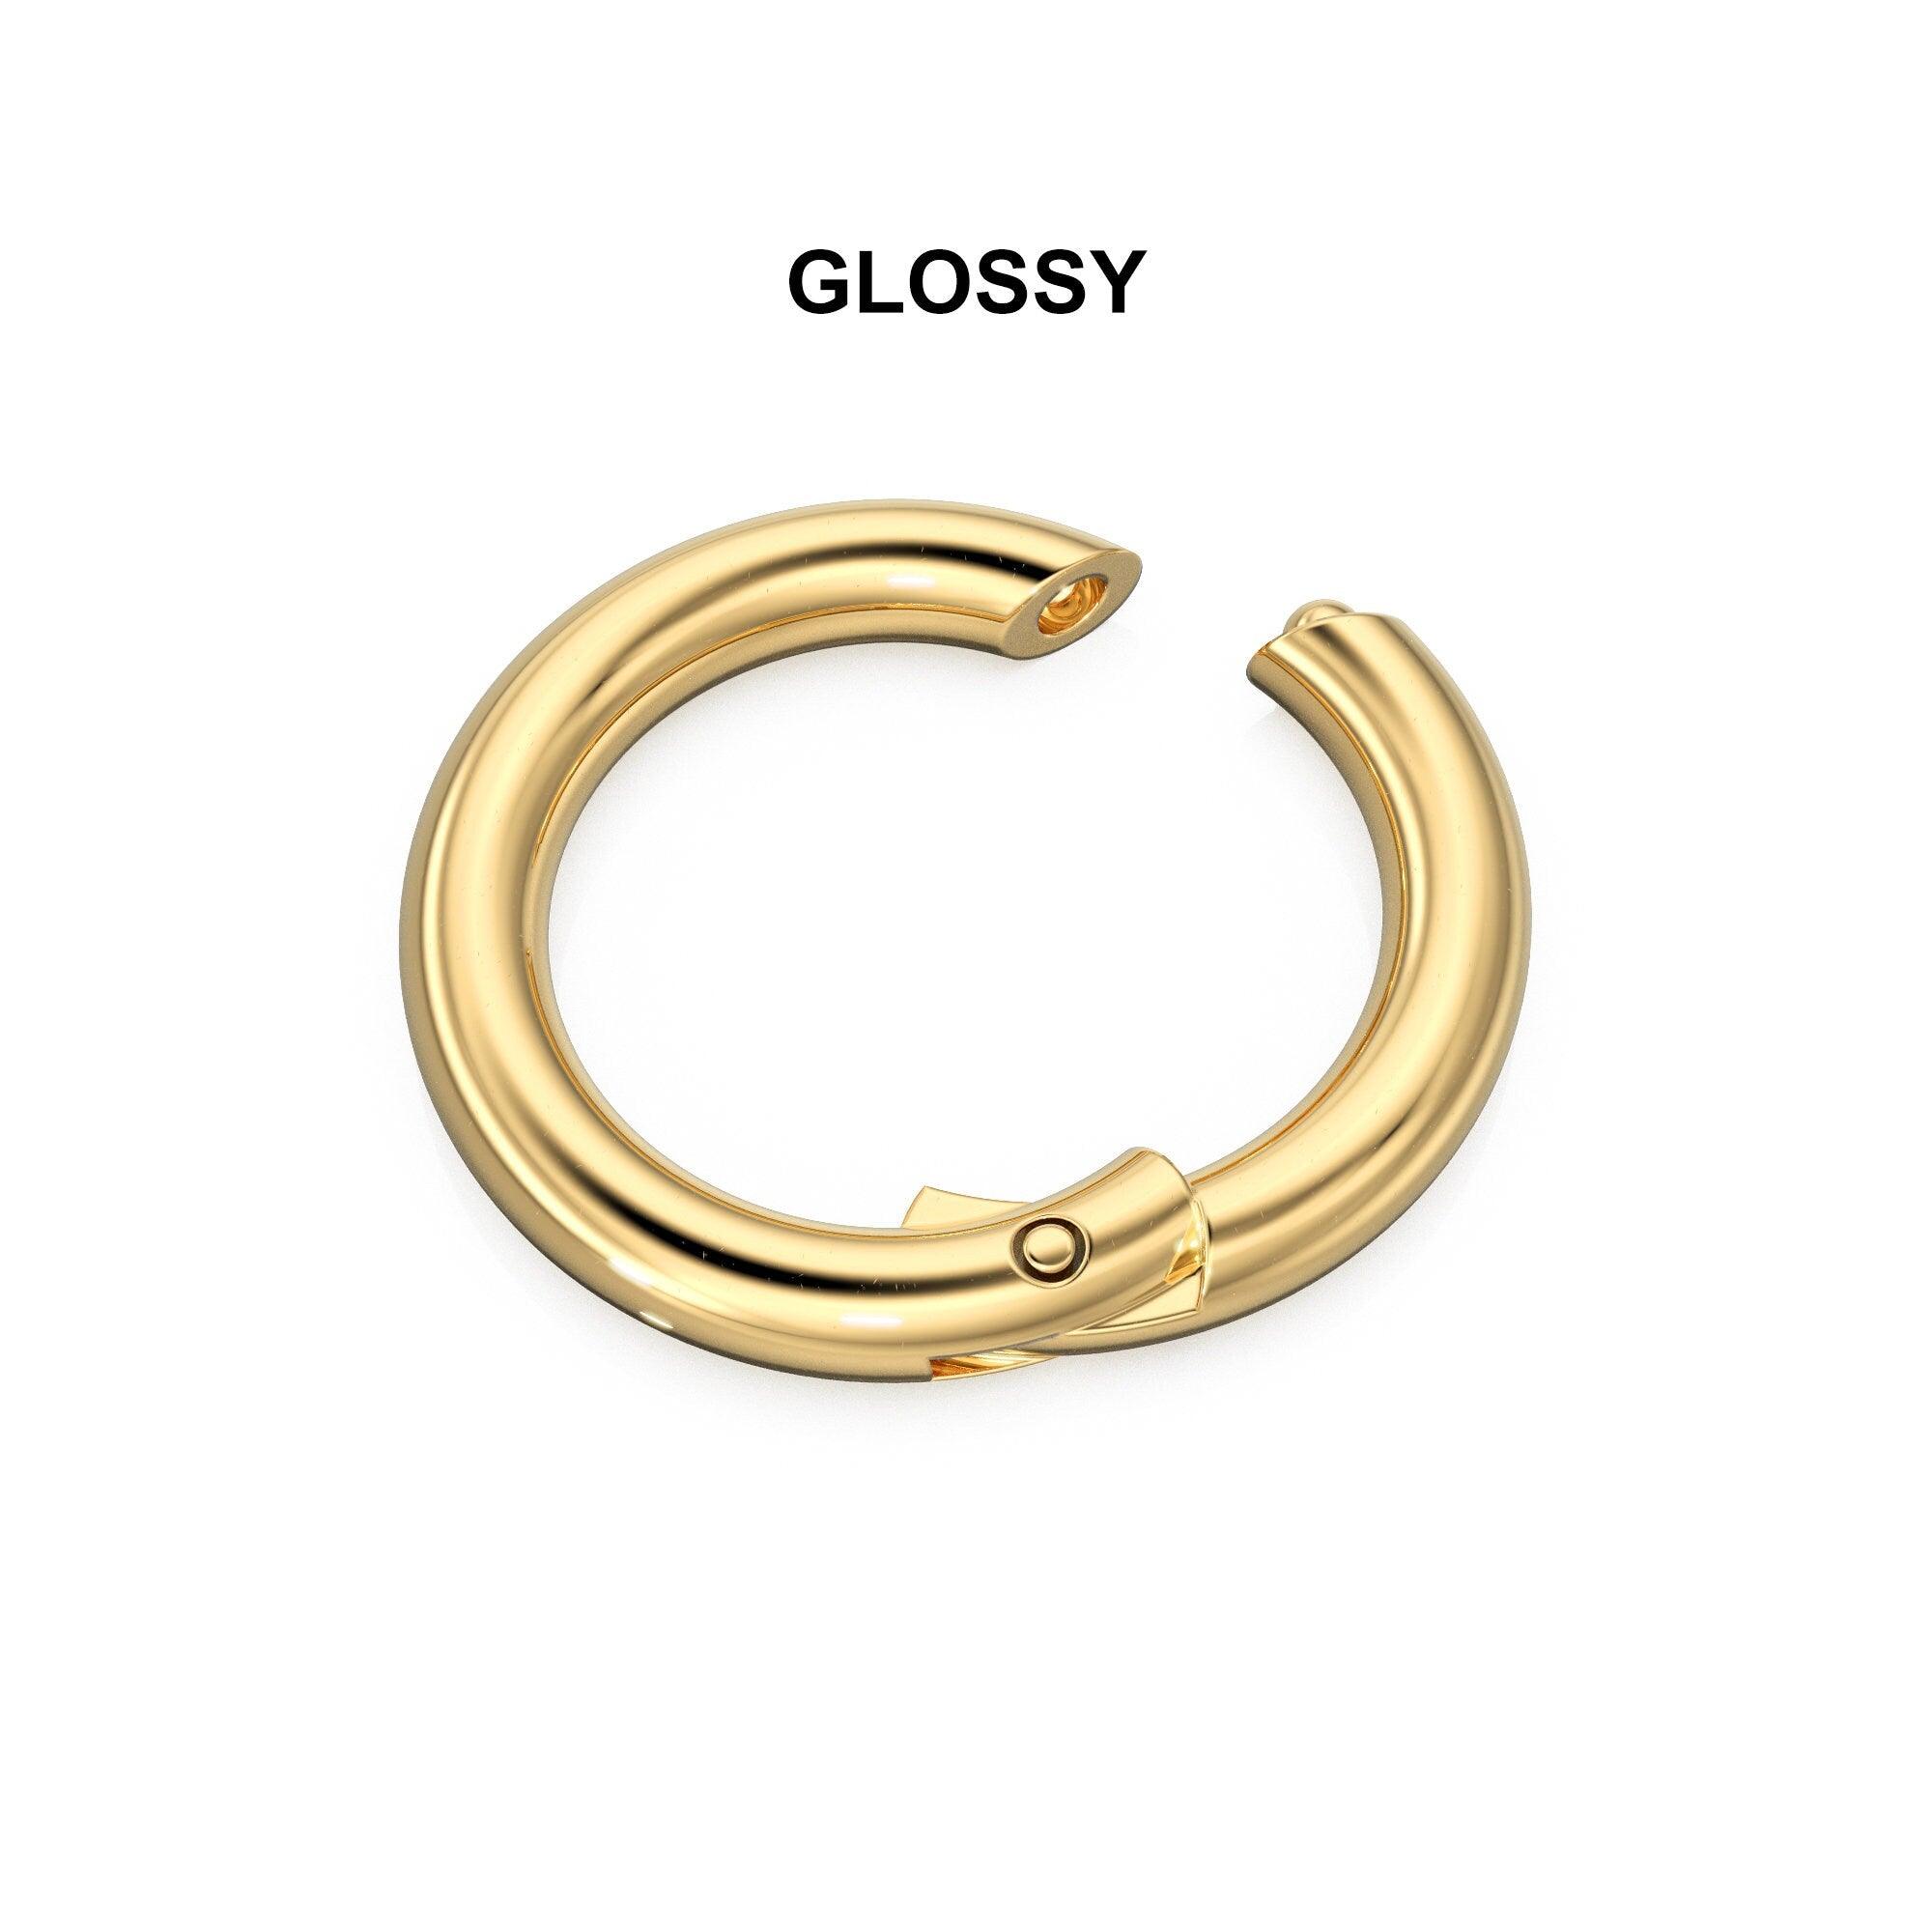  14k Solid Gold Round Enhancer Charm Holder Necklace Link Lock  For Gift Jewelry : Handmade Products